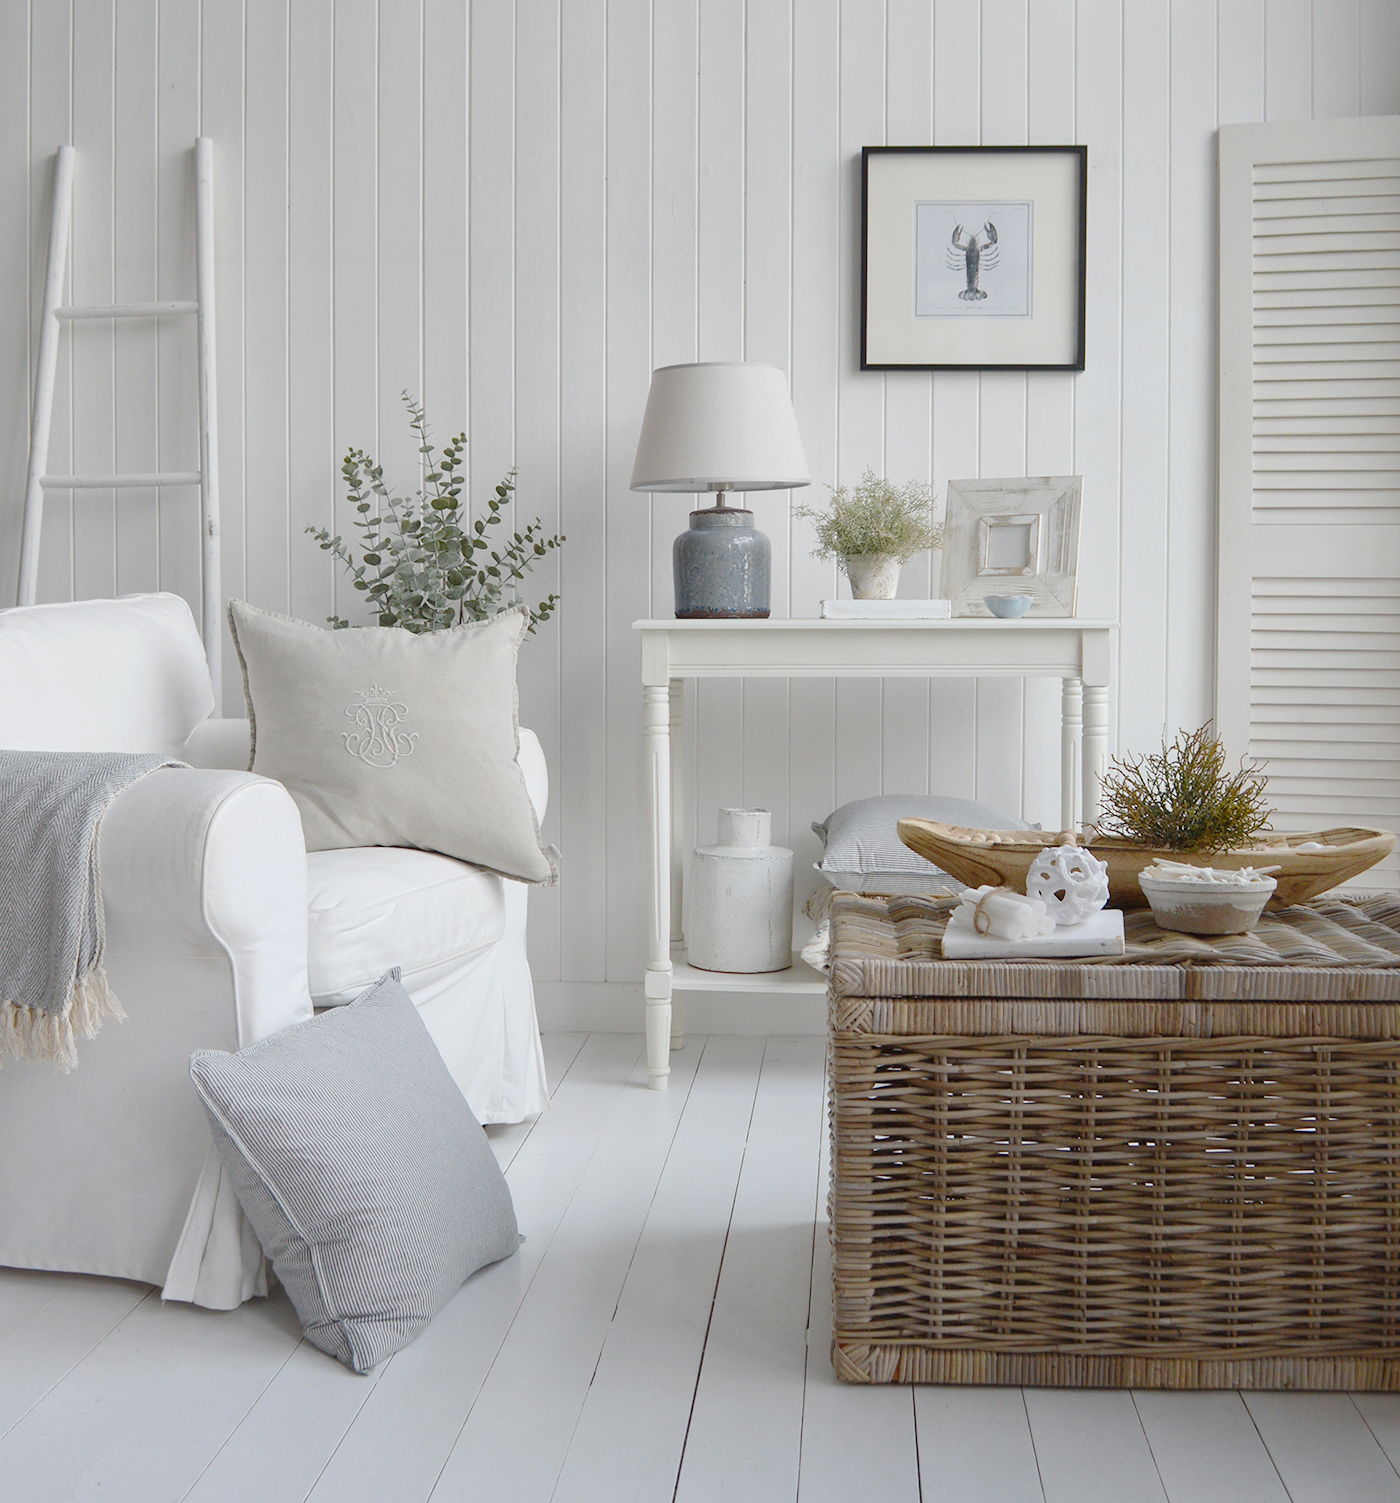 A Coastal New Englands and Hamptons style interior in shades of whites and blue with natural pieces of furniture and homne decor